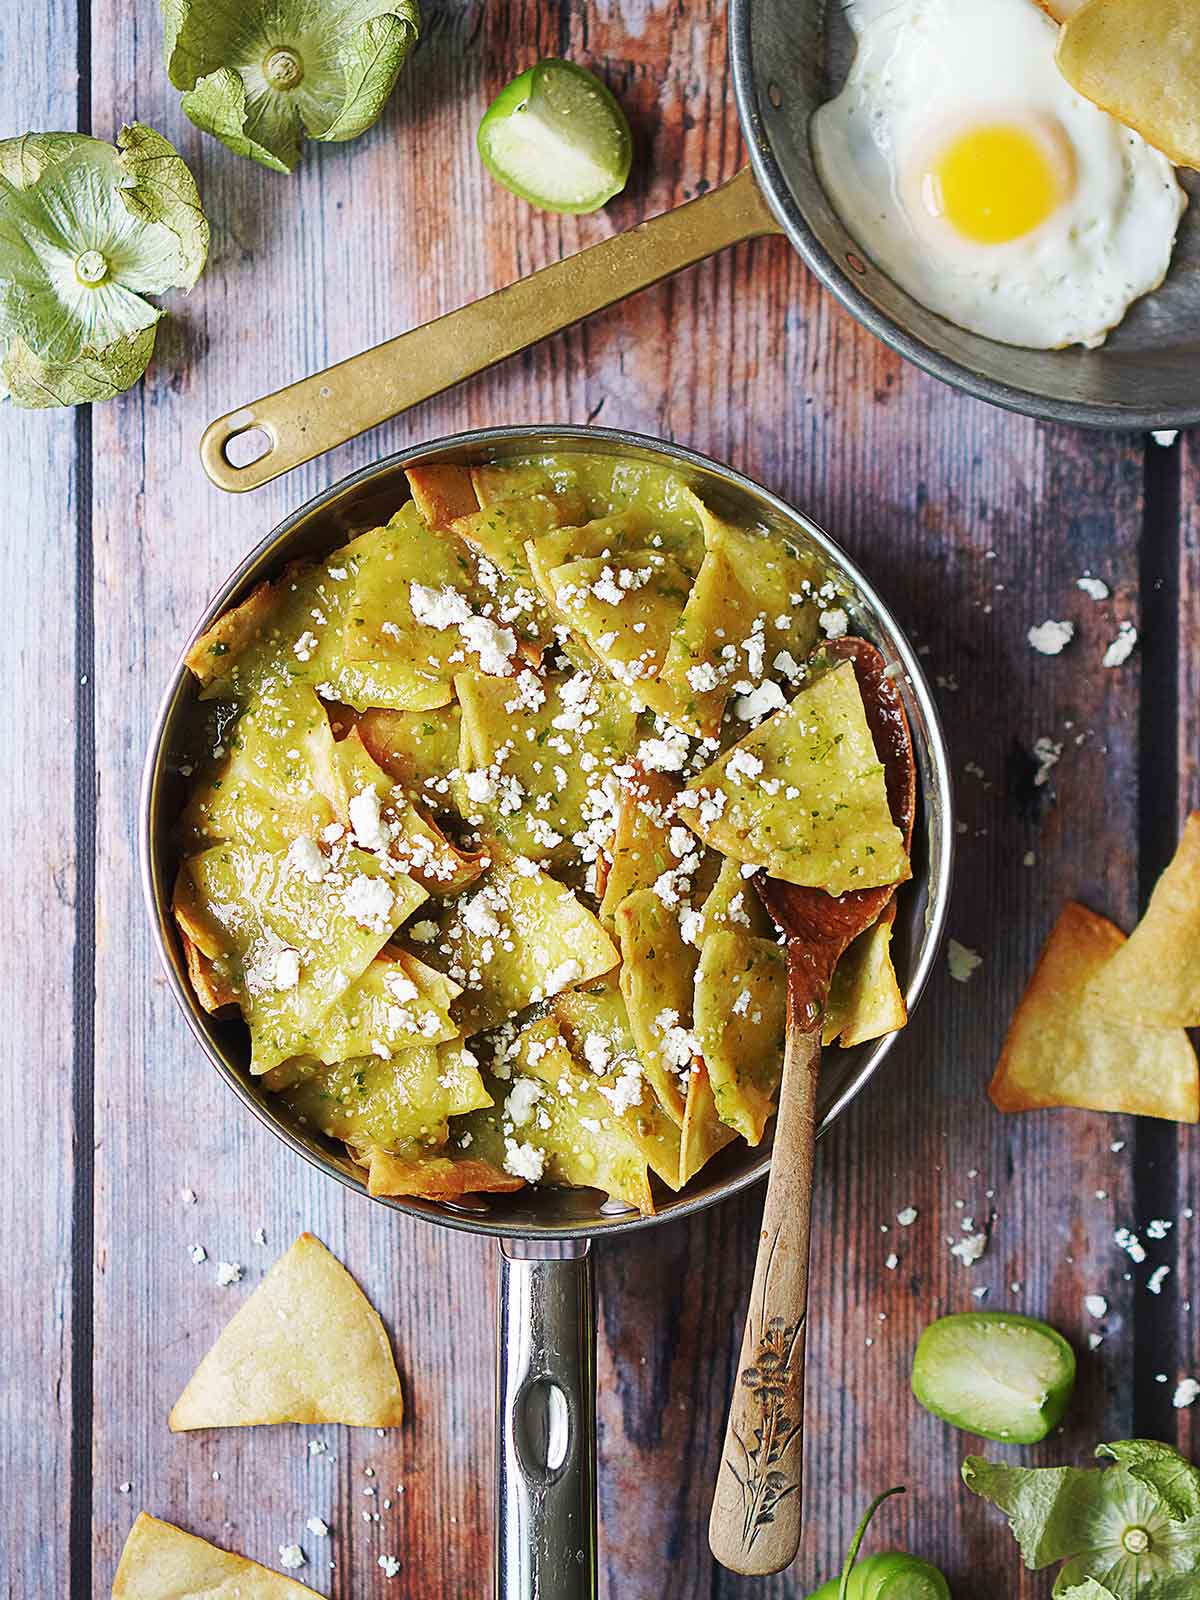 A skillet with fried tortillas smothered in salsa verde.